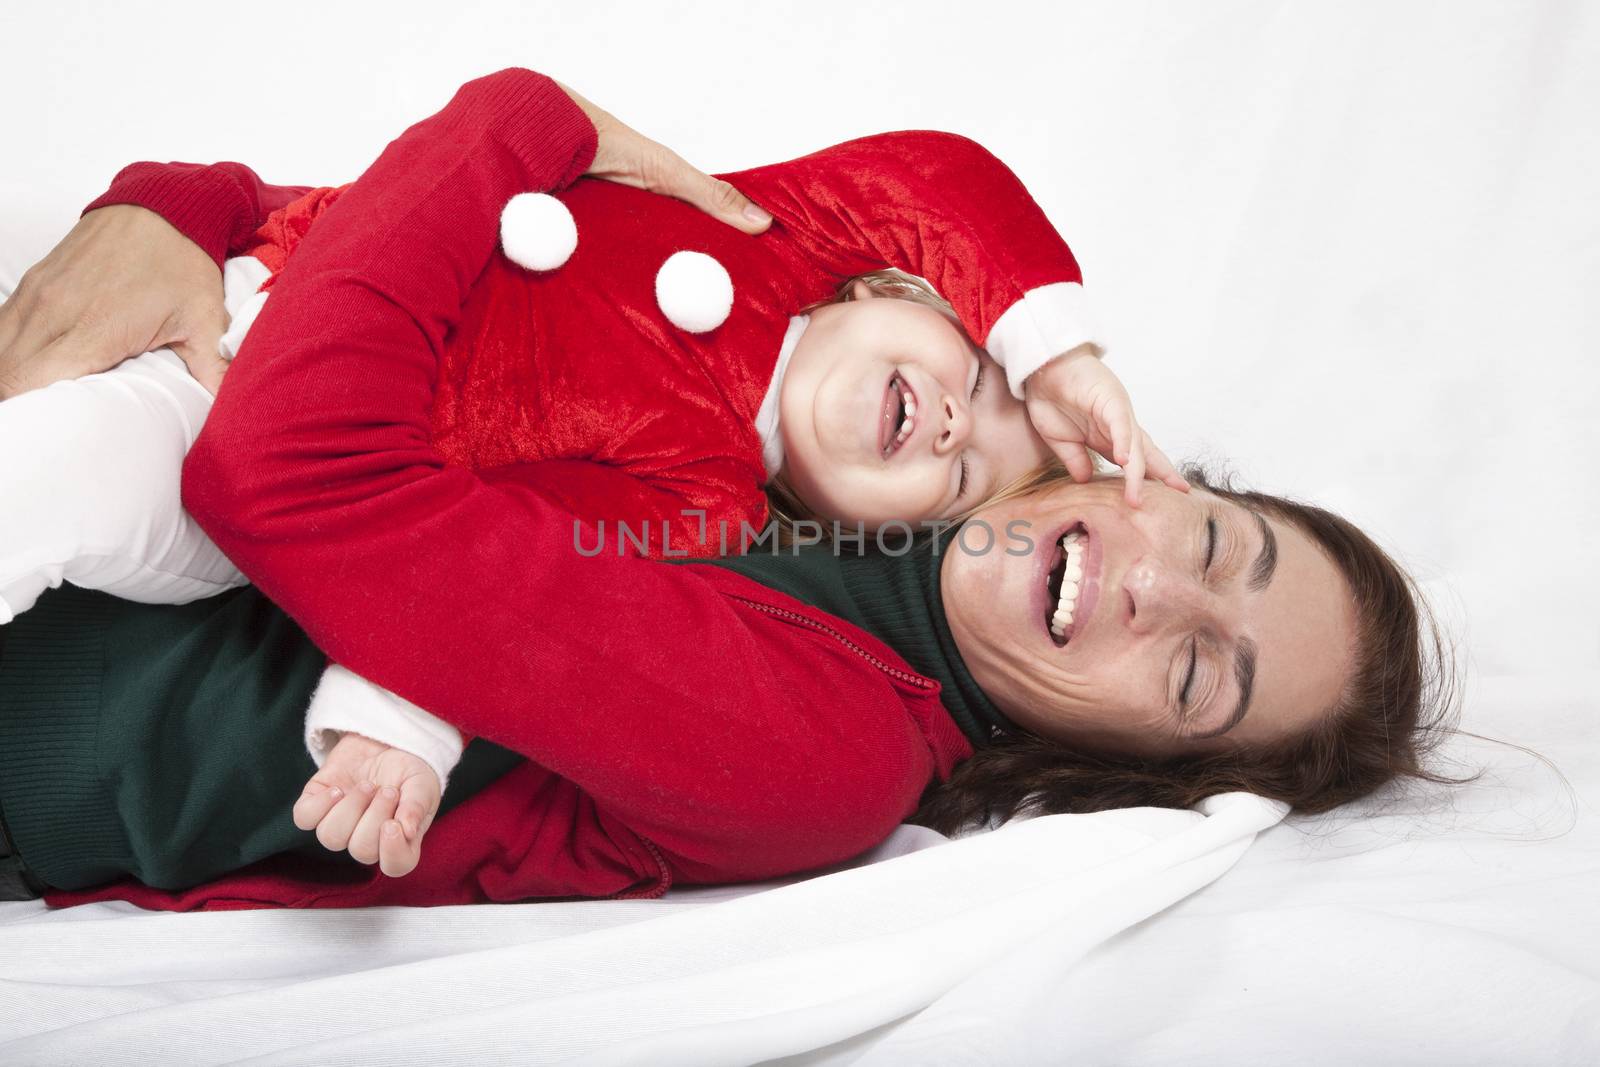 tender and funny portrait of one year age caucasian blonde cute lovely baby Santa Claus Christmas disguise with brunette woman mother red cardigan green sweater embraced laughing together lying on white floor background